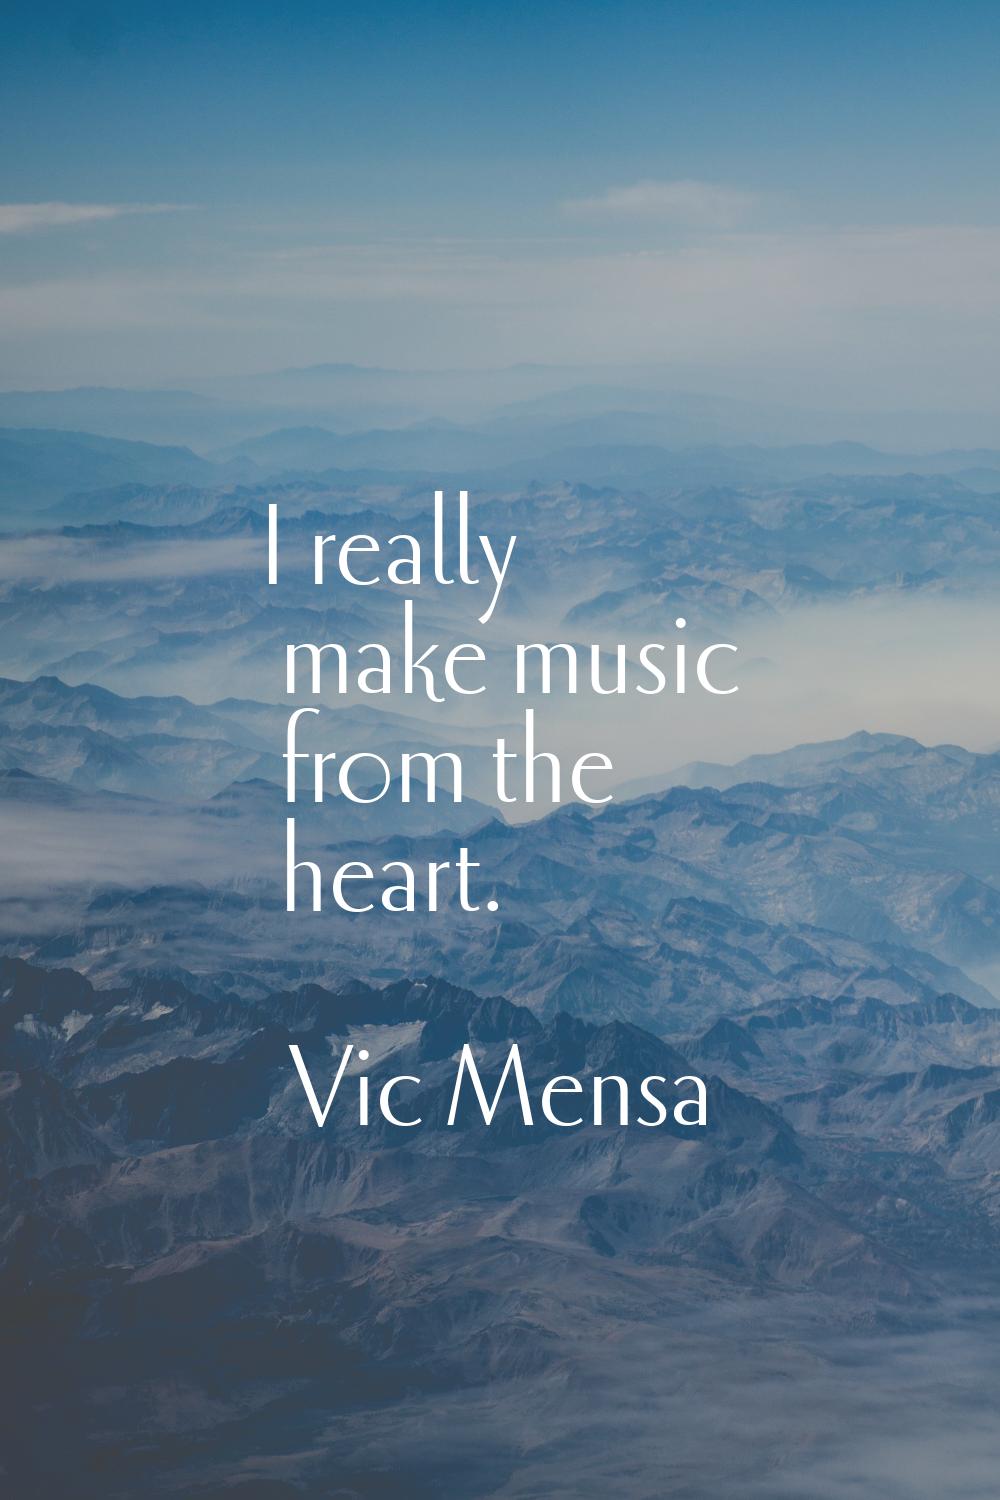 I really make music from the heart.